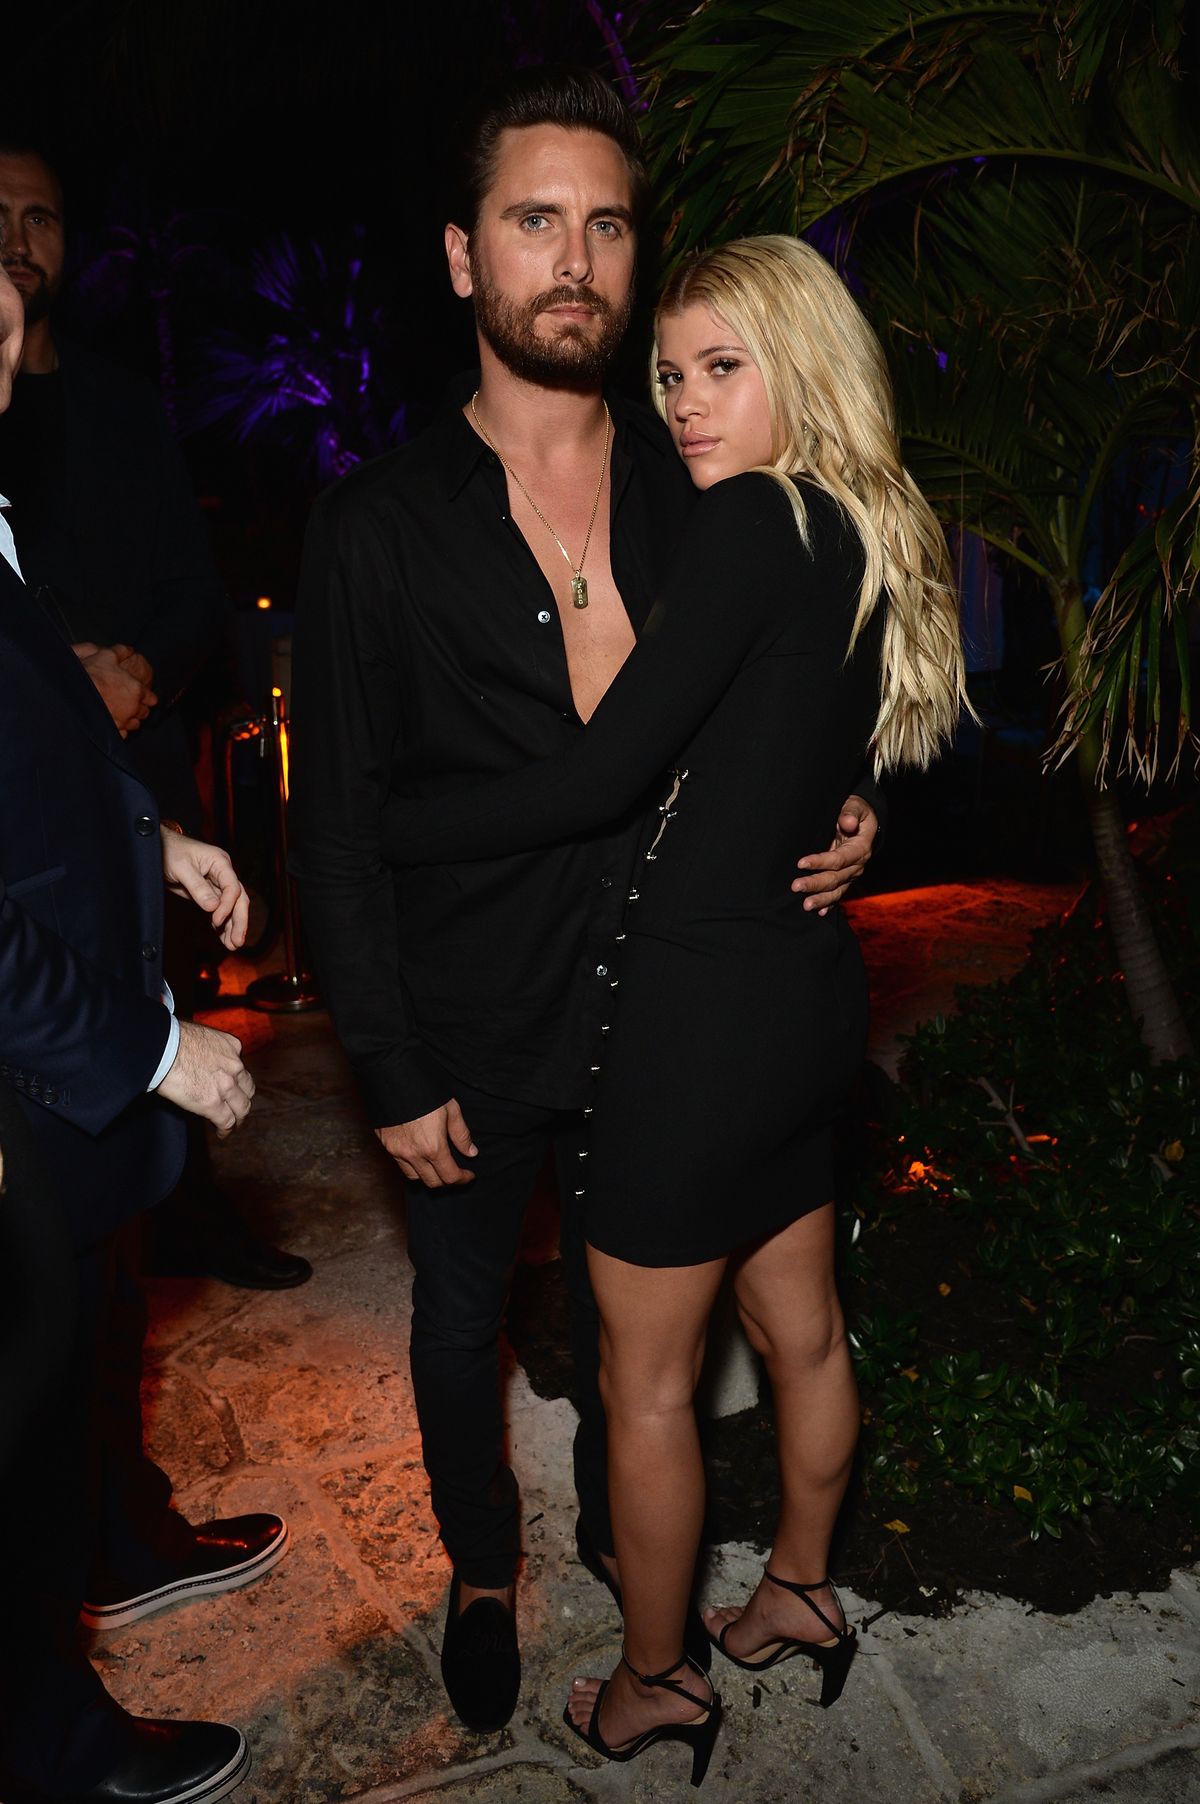 Sofia Richie Sex Movies Full Hd - Sofia Richie Scott Disick Sexy Instagram - Sofia Richie Just Posted a  Suggestive Photo with Scott Disick on Her Hotel Room Bed